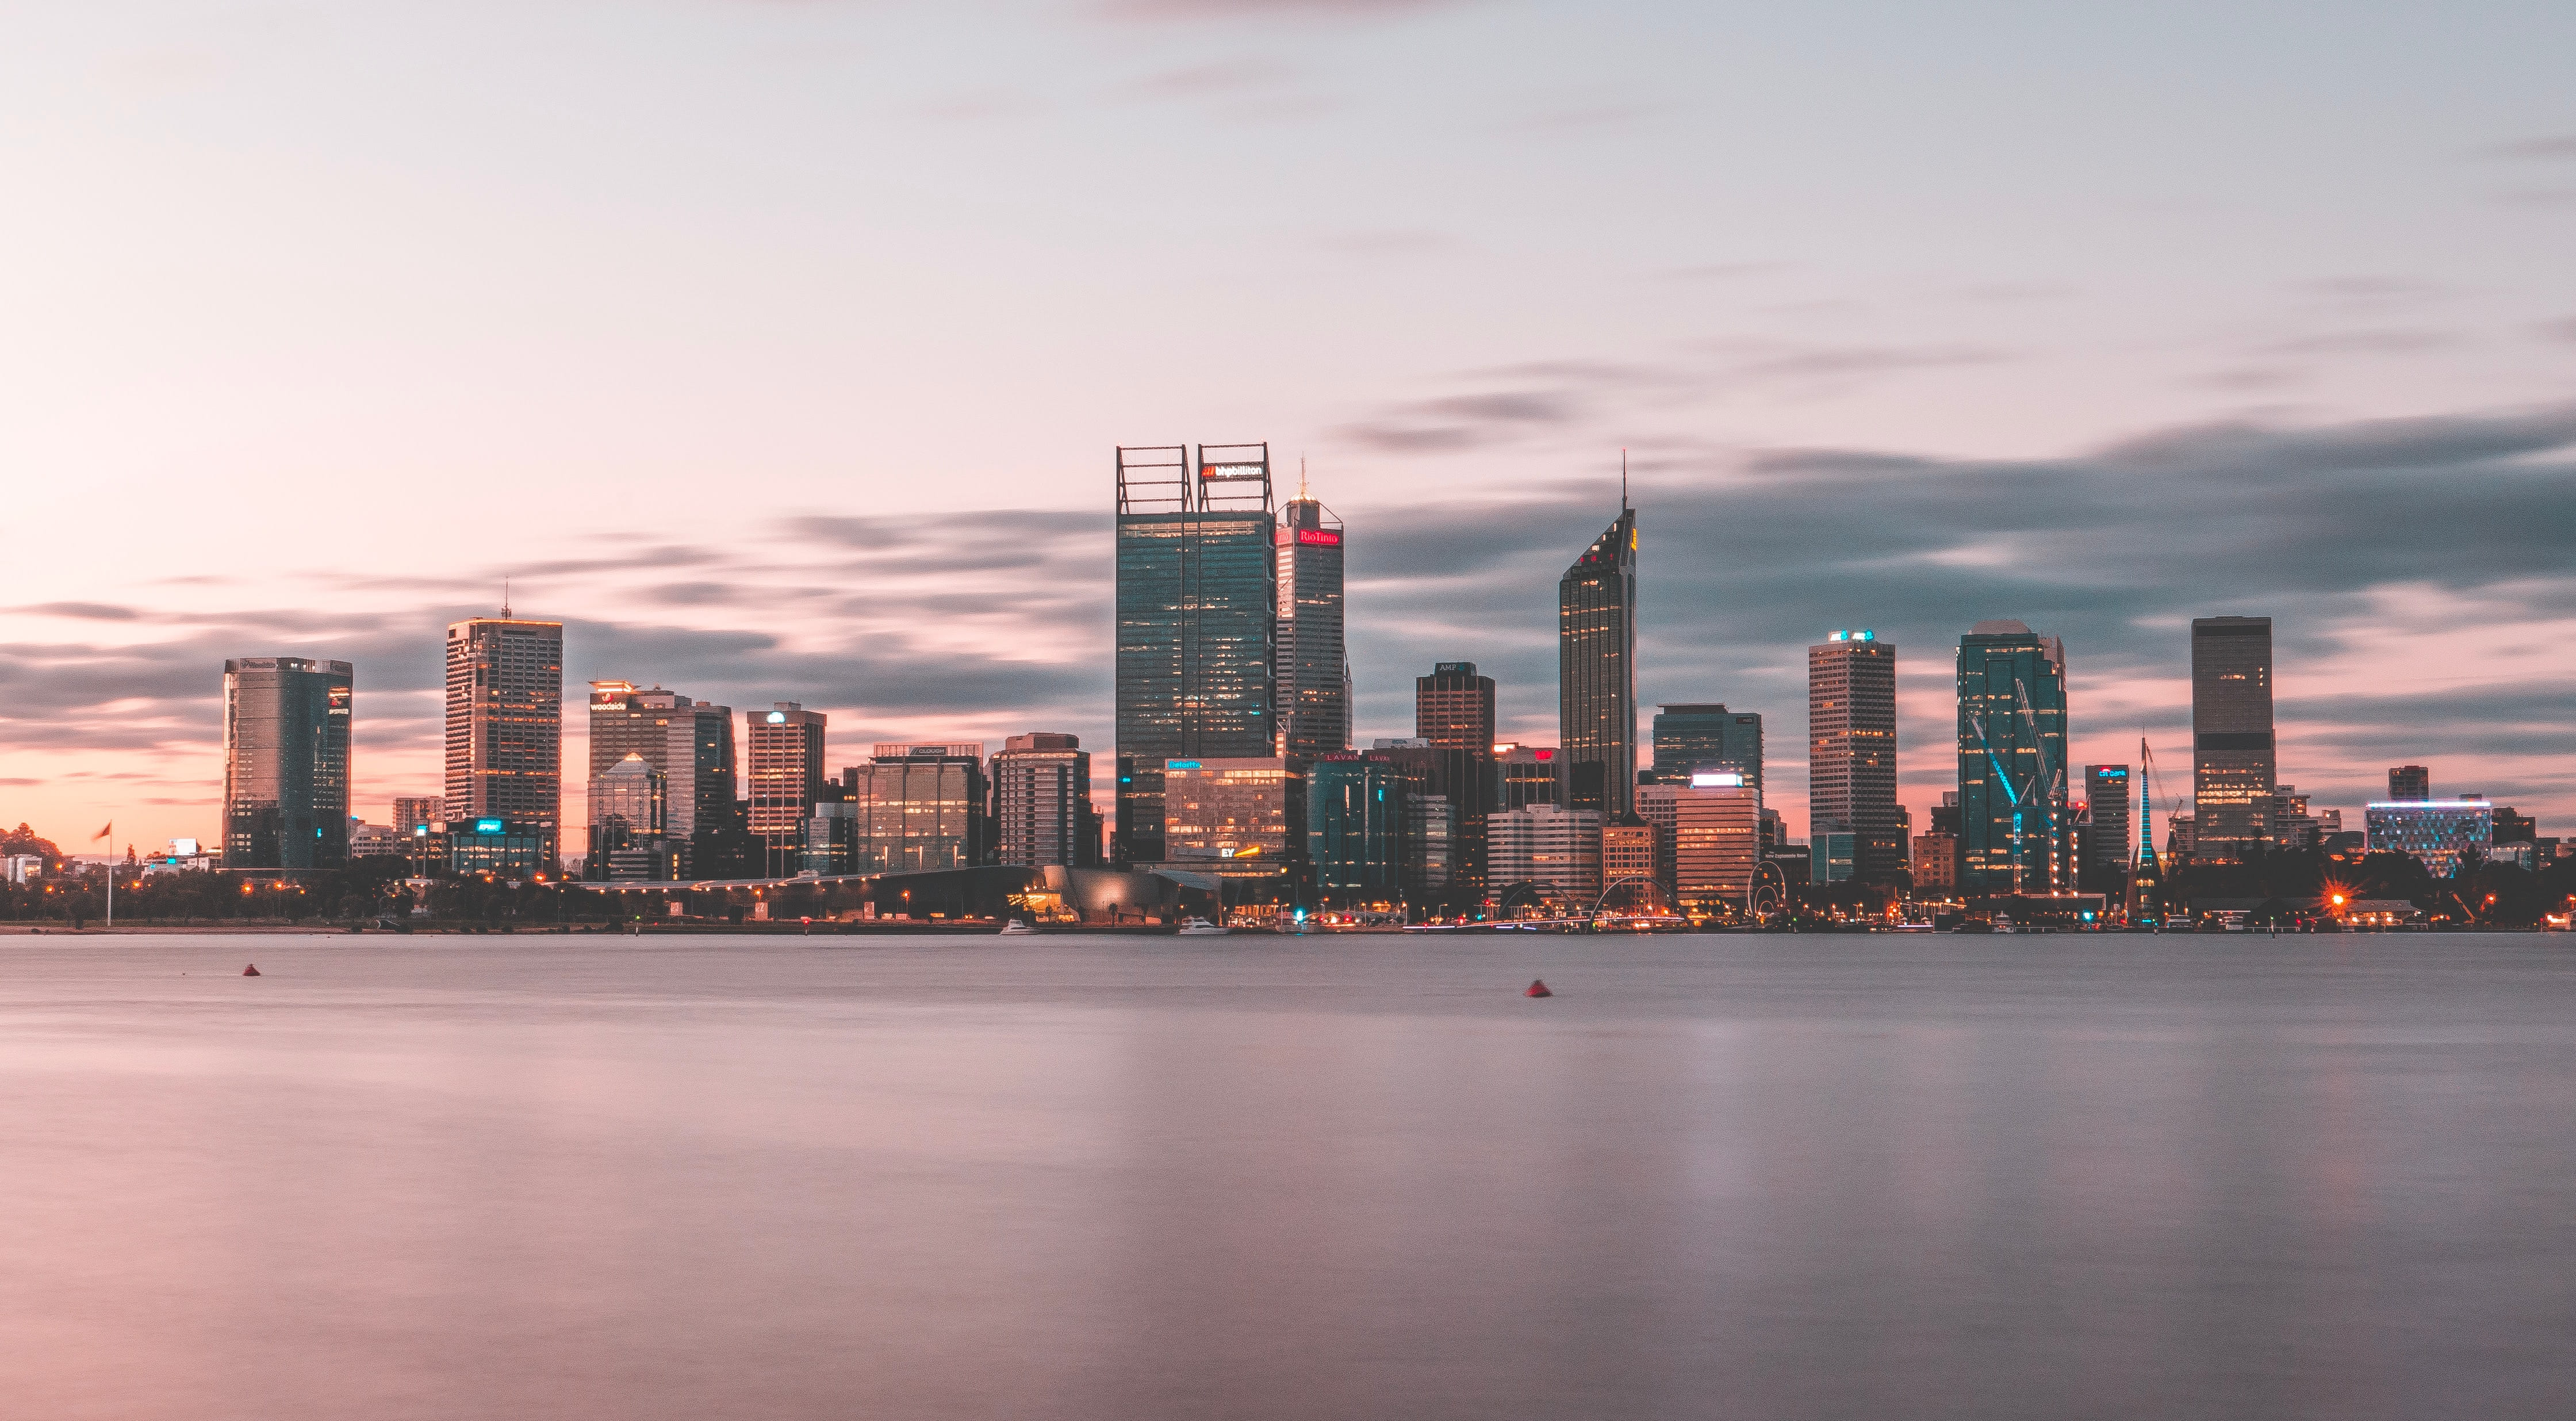 A photo of the city of Perth Western Australia